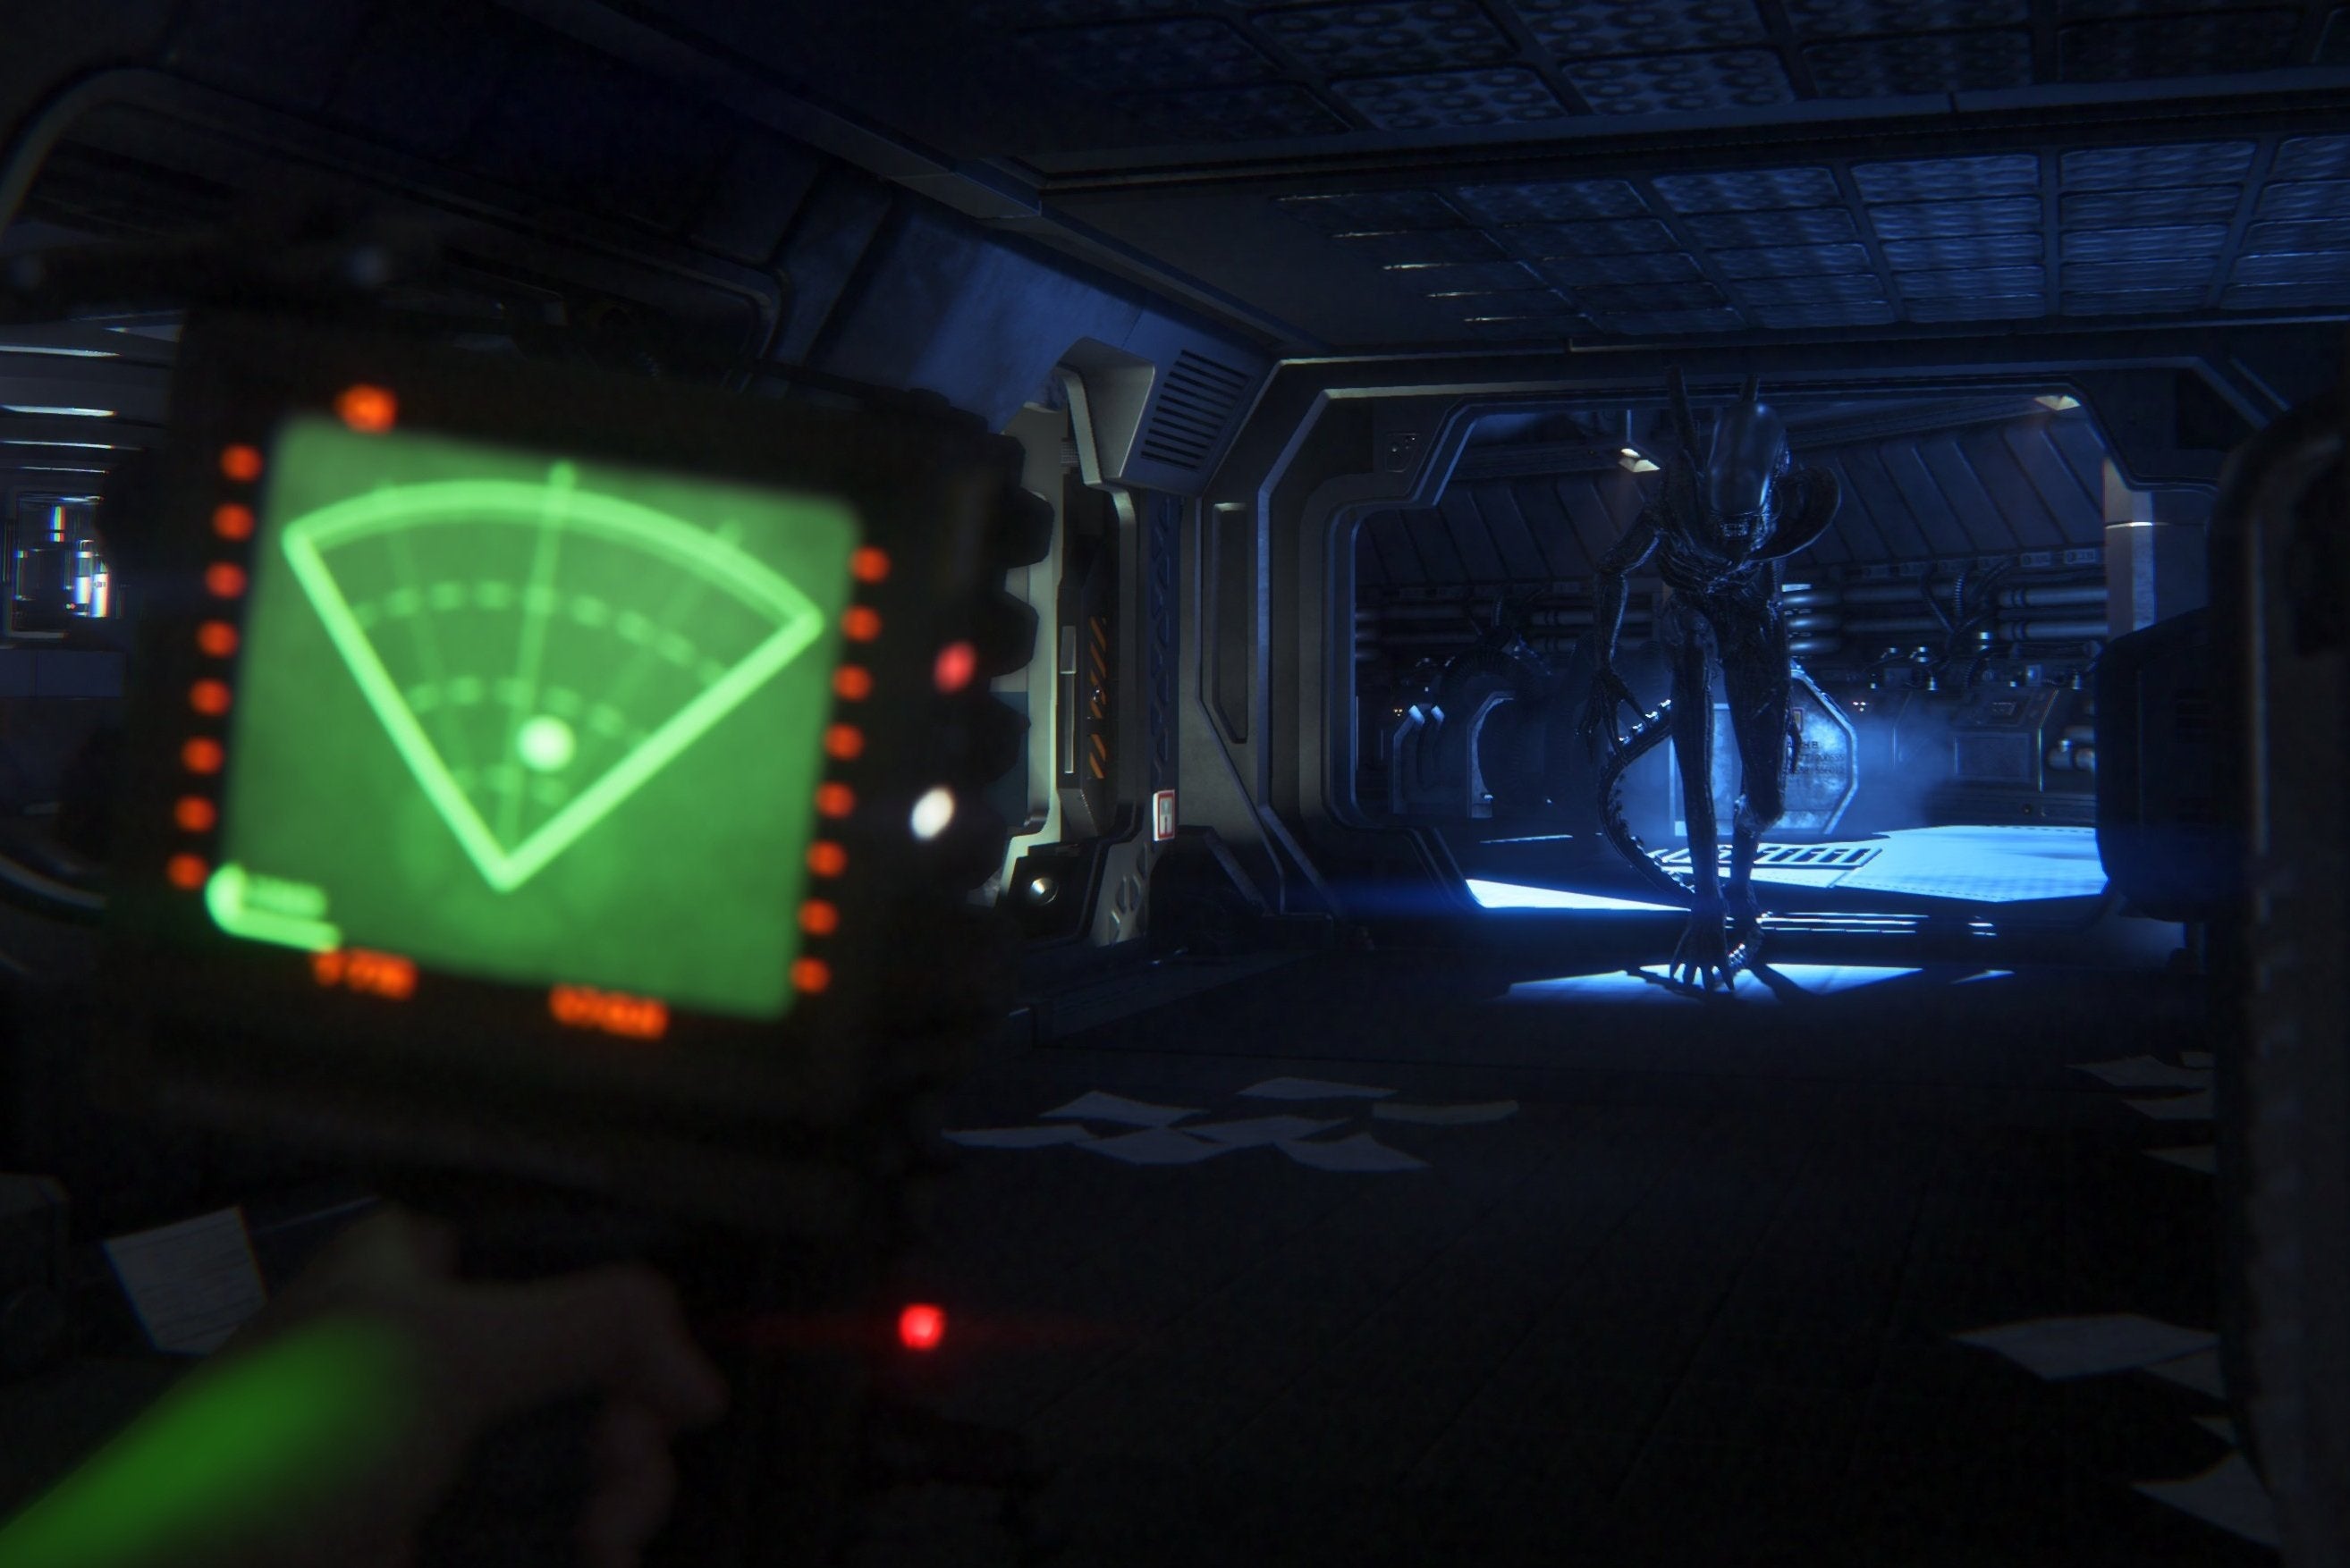 Image for Alien: Isolation enters UK chart in second place